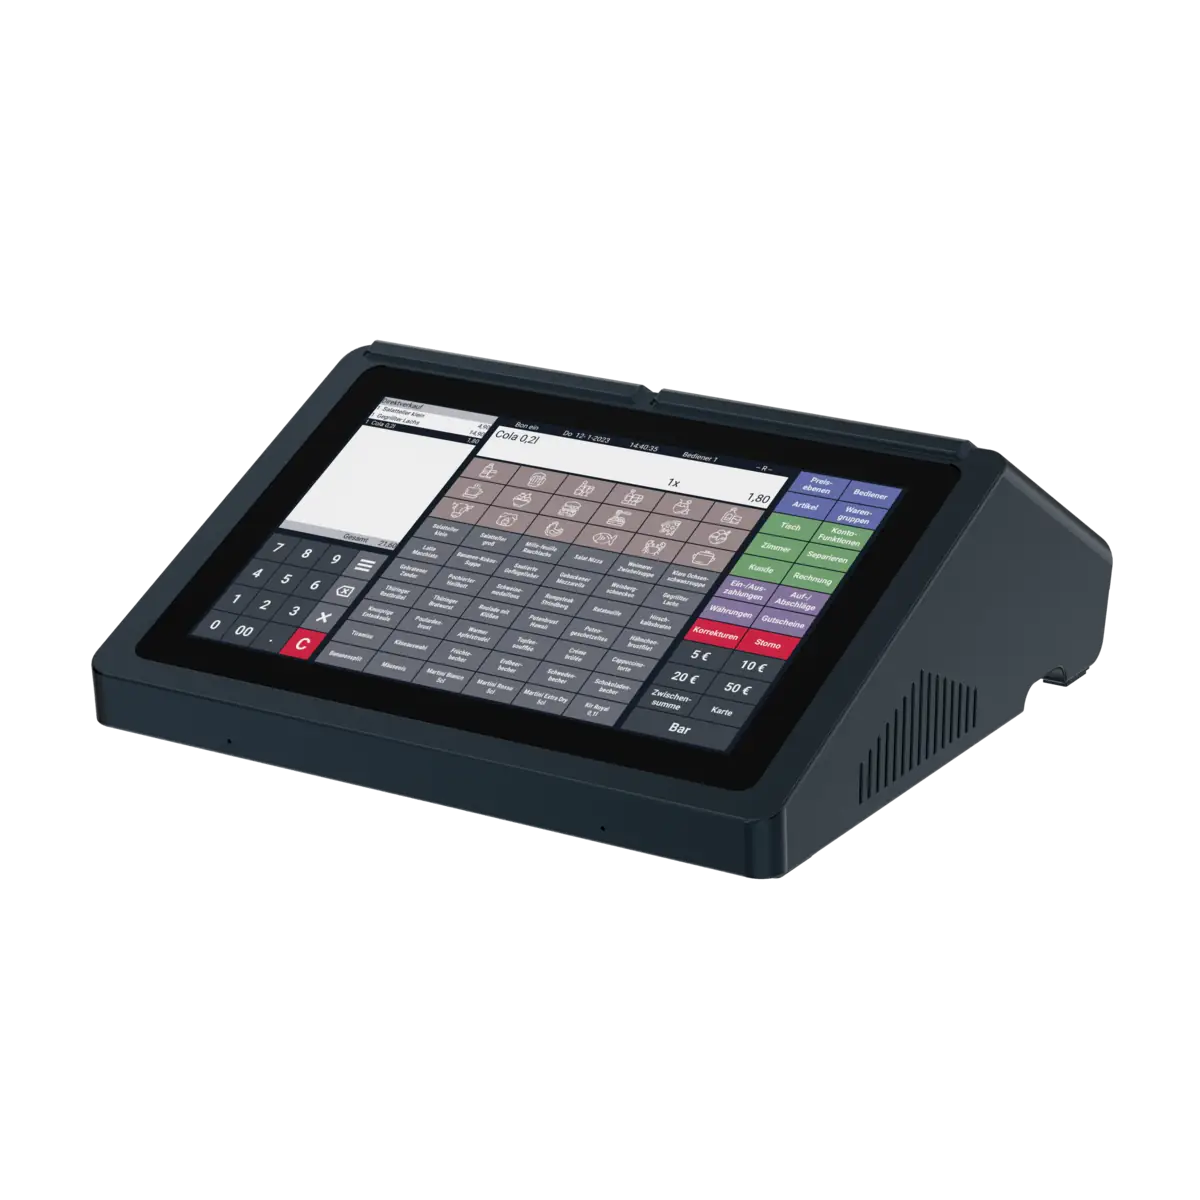 Android pos system QTouch9, right